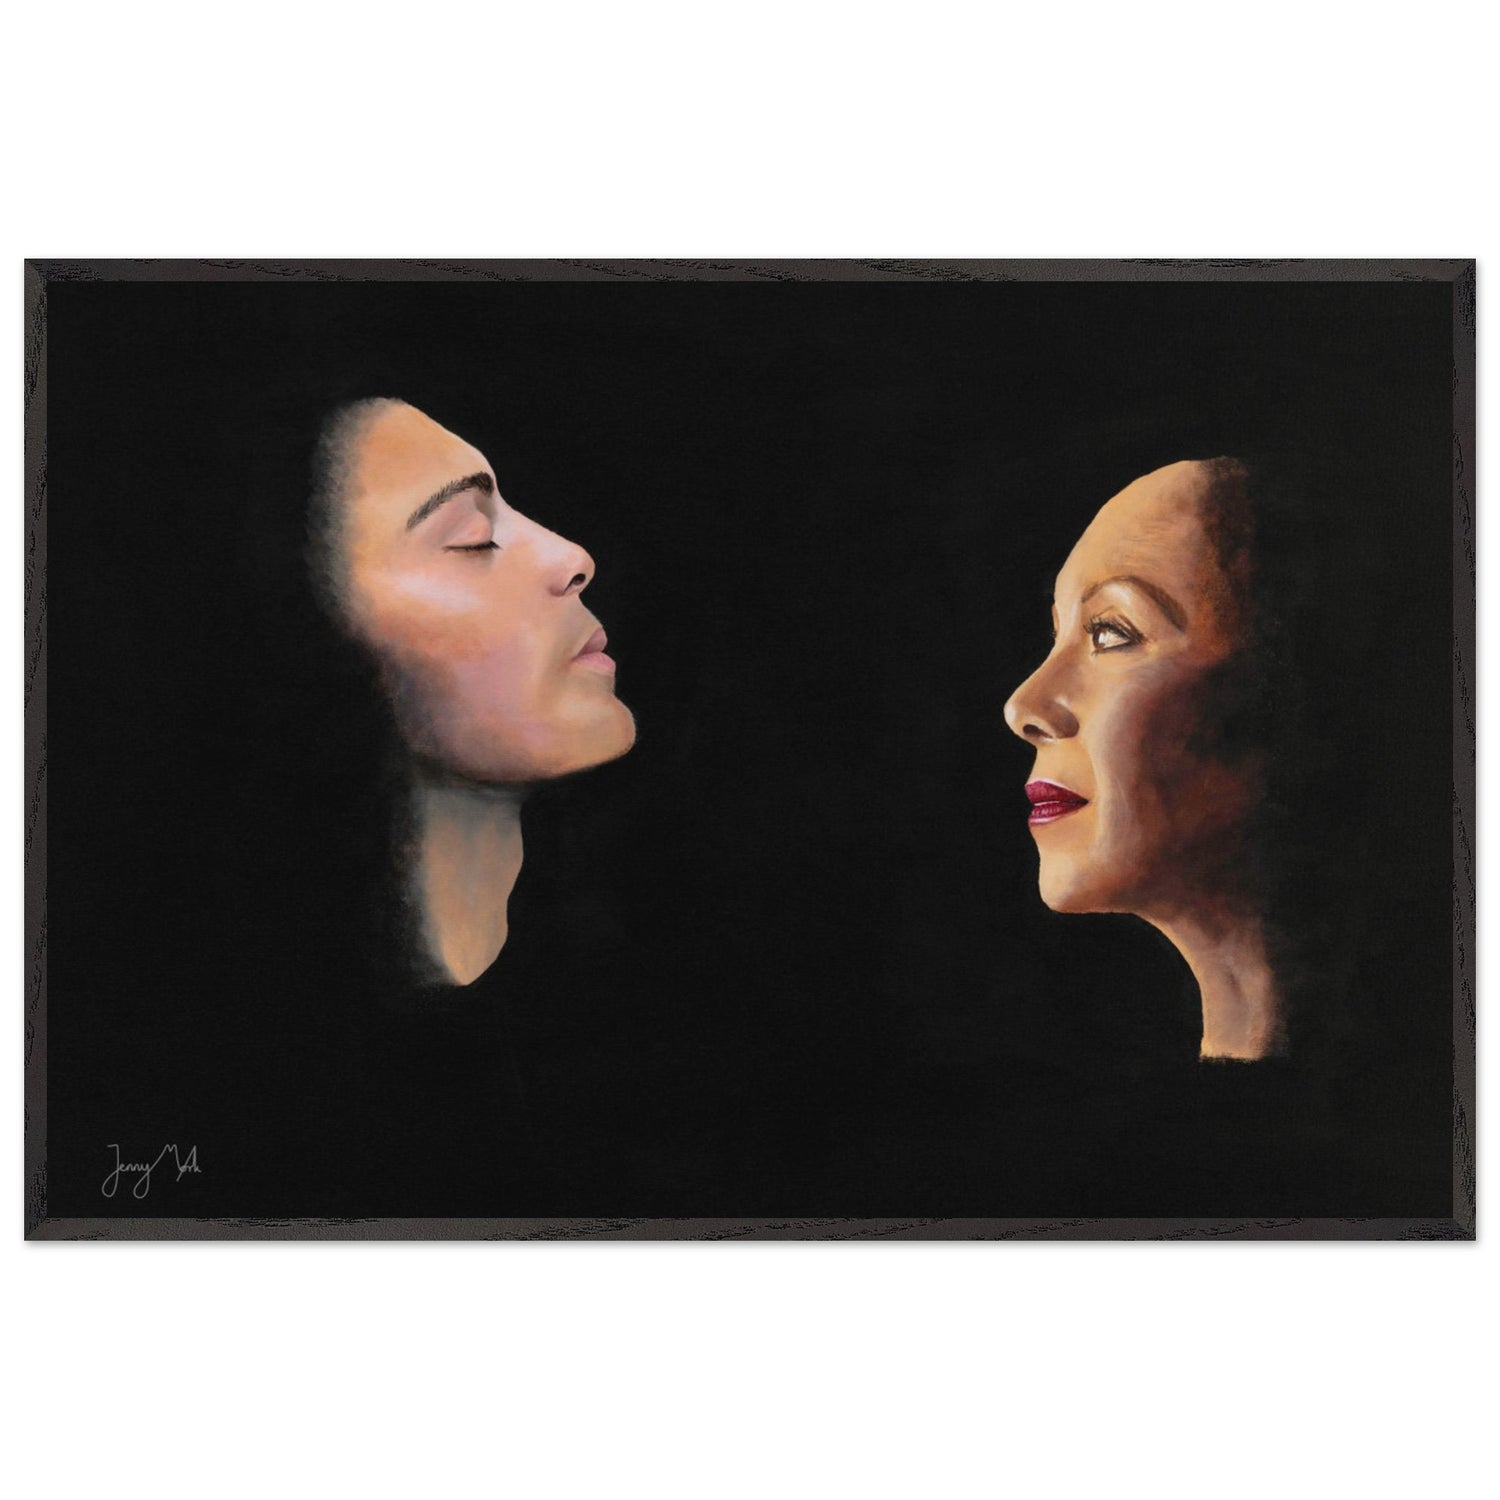 The painting "Pride" displaying two faces facing each other coming out from a dark background